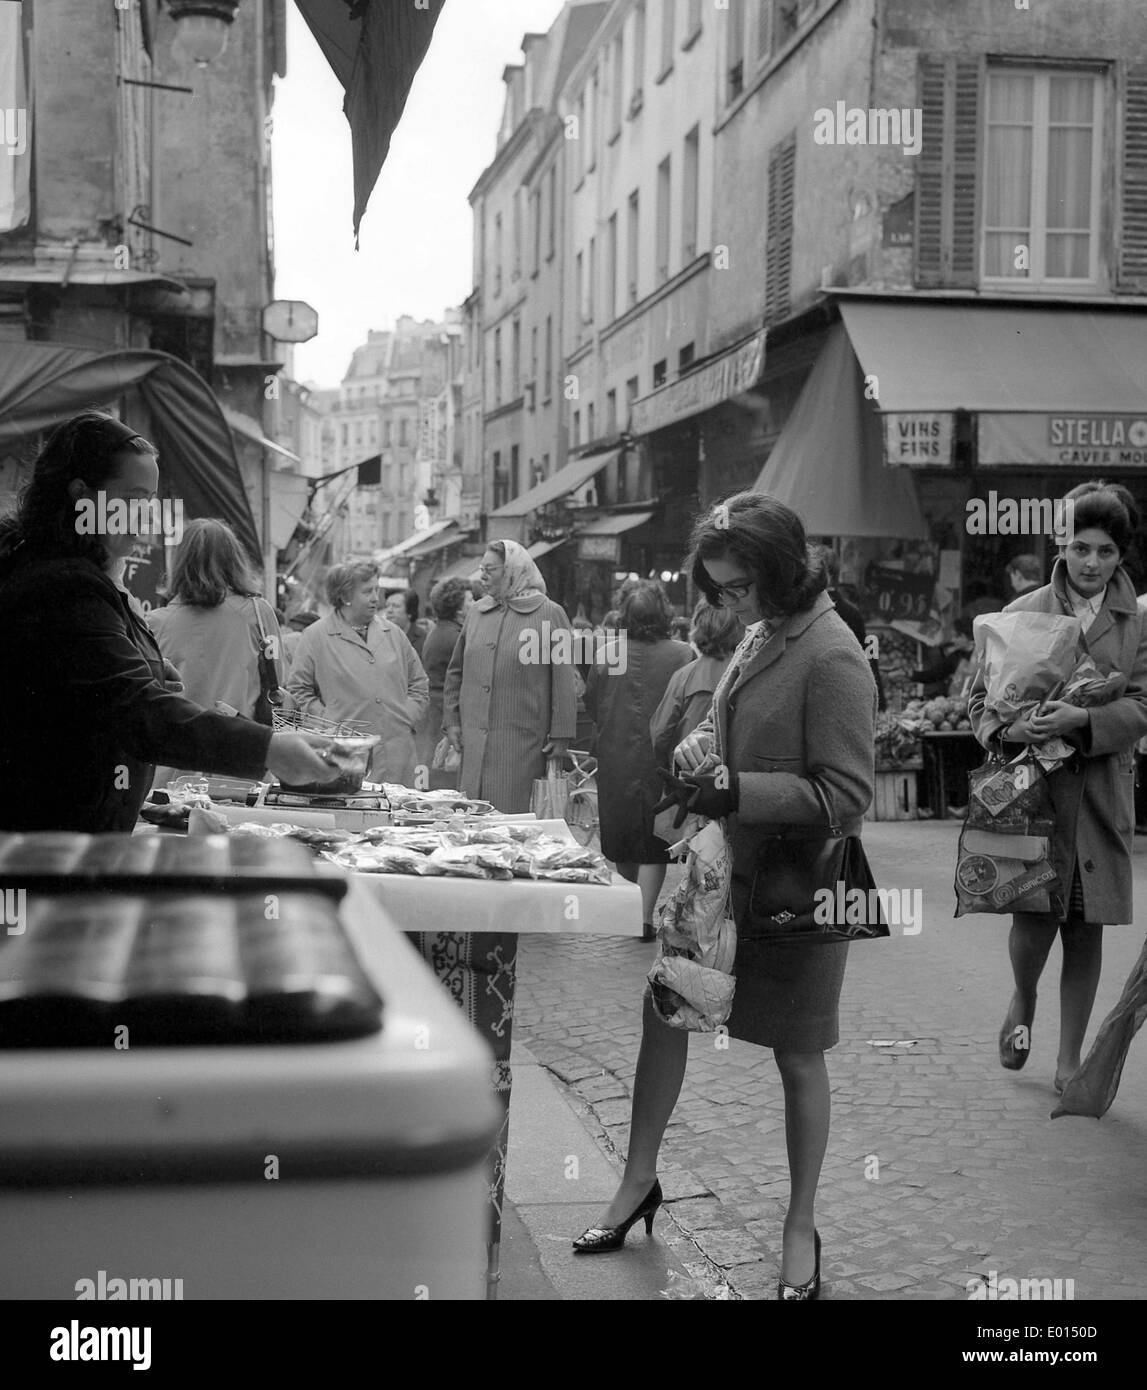 Rue mouffetard Black and White Stock Photos & Images - Alamy